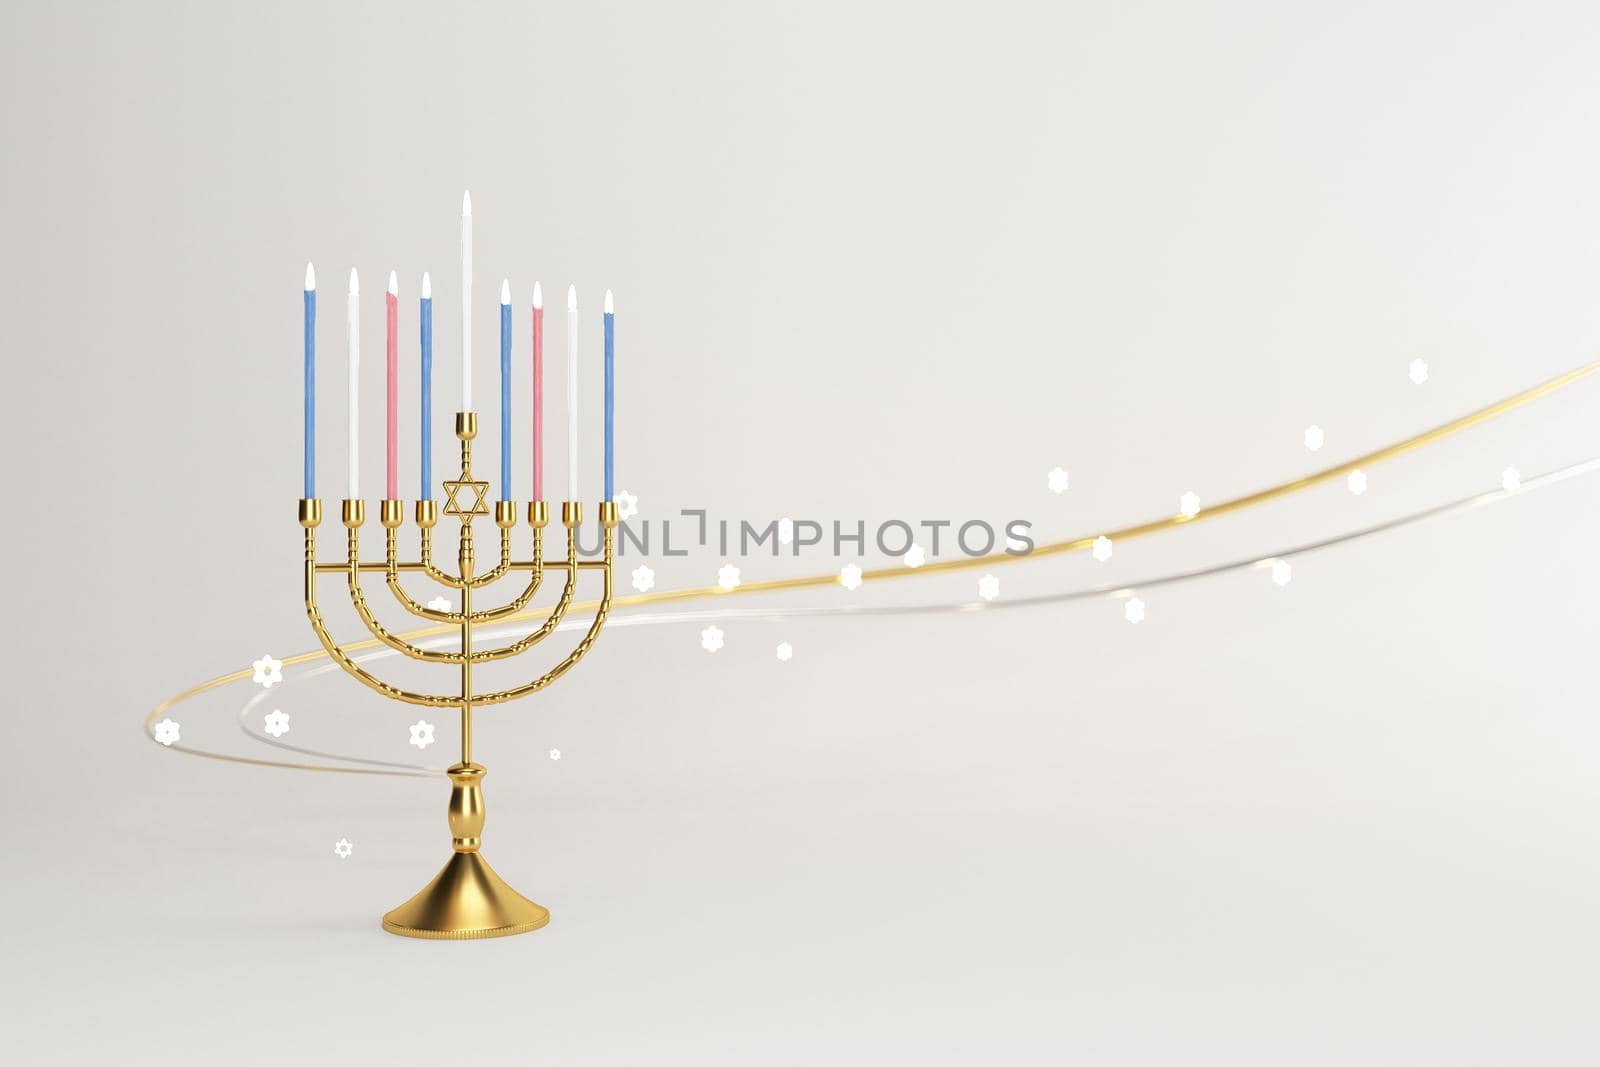 3d rendering Image of Jewish holiday Hanukkah with menorah or traditional Candelabra on a  white background.